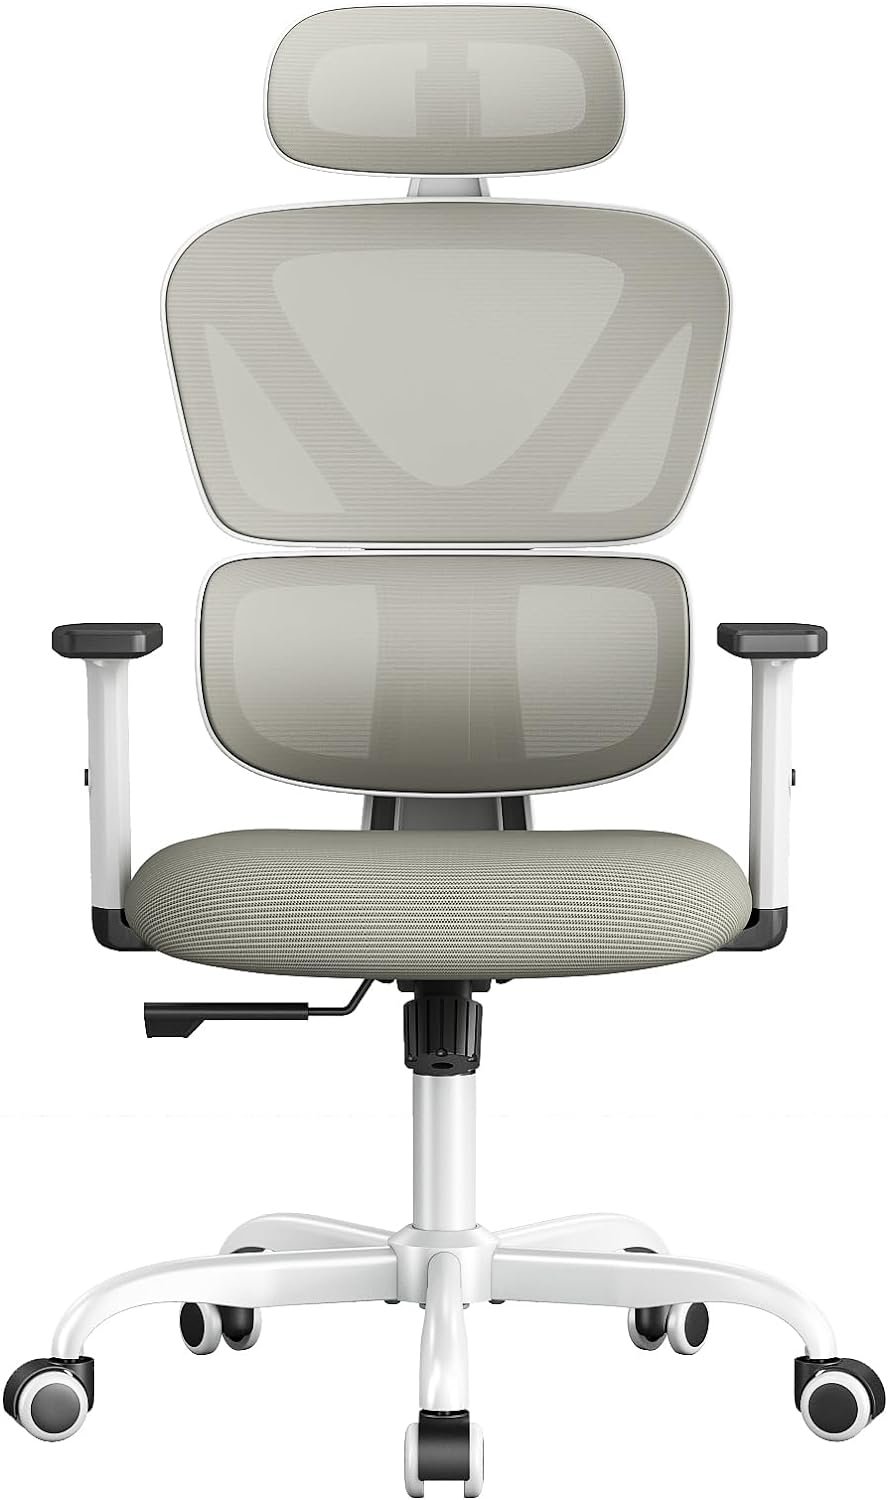 Sytas Ergonomic Home Office Chair, Desk Chair with Lumbar Support, Ergonomic Computer Chair High Back